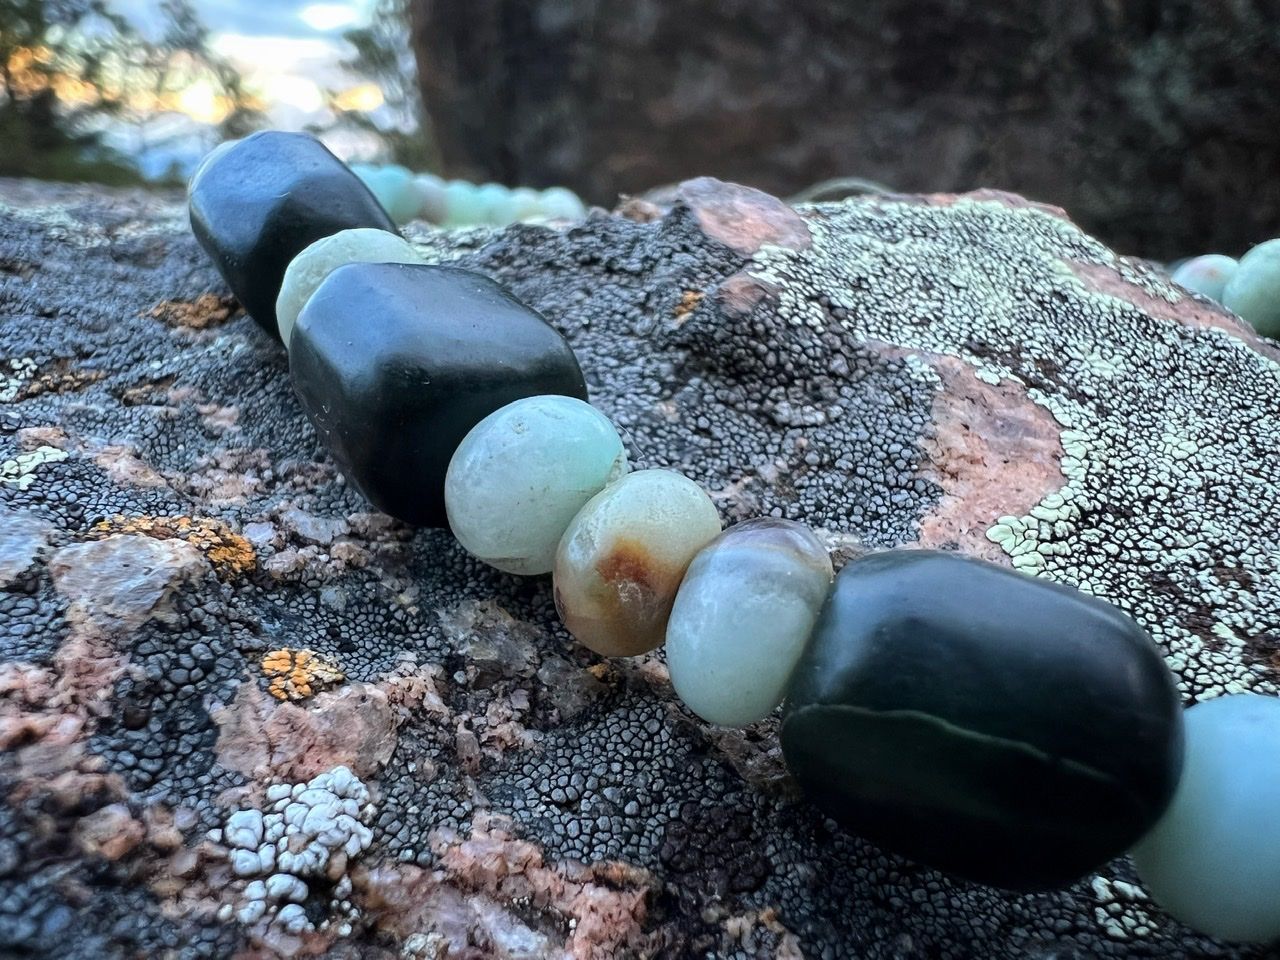 A necklace with a silver moon at the center and deep green jade and soft blue Amazonite beads rests on a lichen covered Boulder in the forest